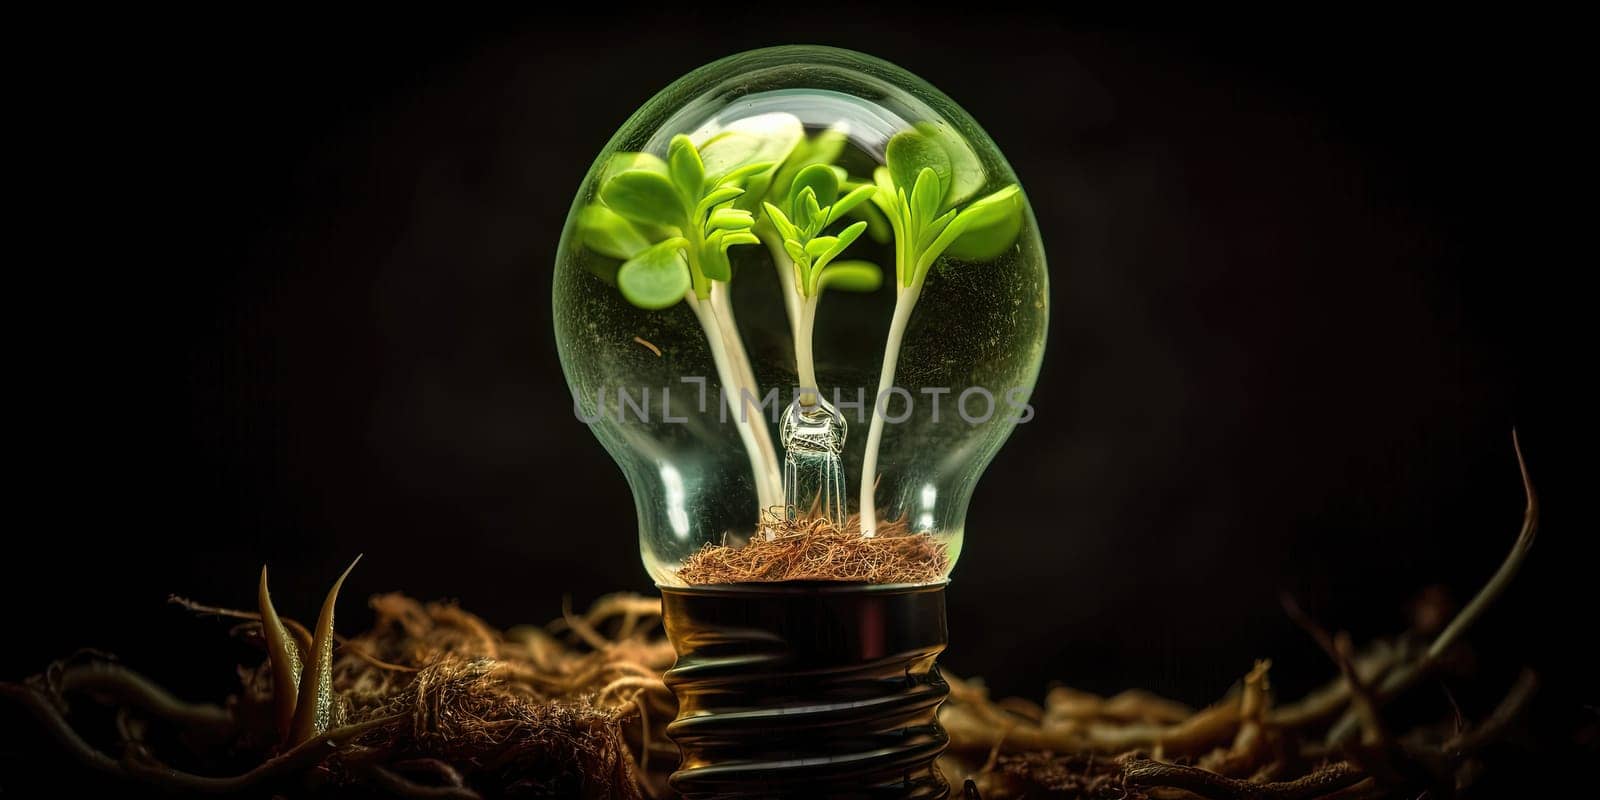 Electric Bulb With Growing Green Plant Inside, Concept Of Ecologic Life Of Planet by GekaSkr